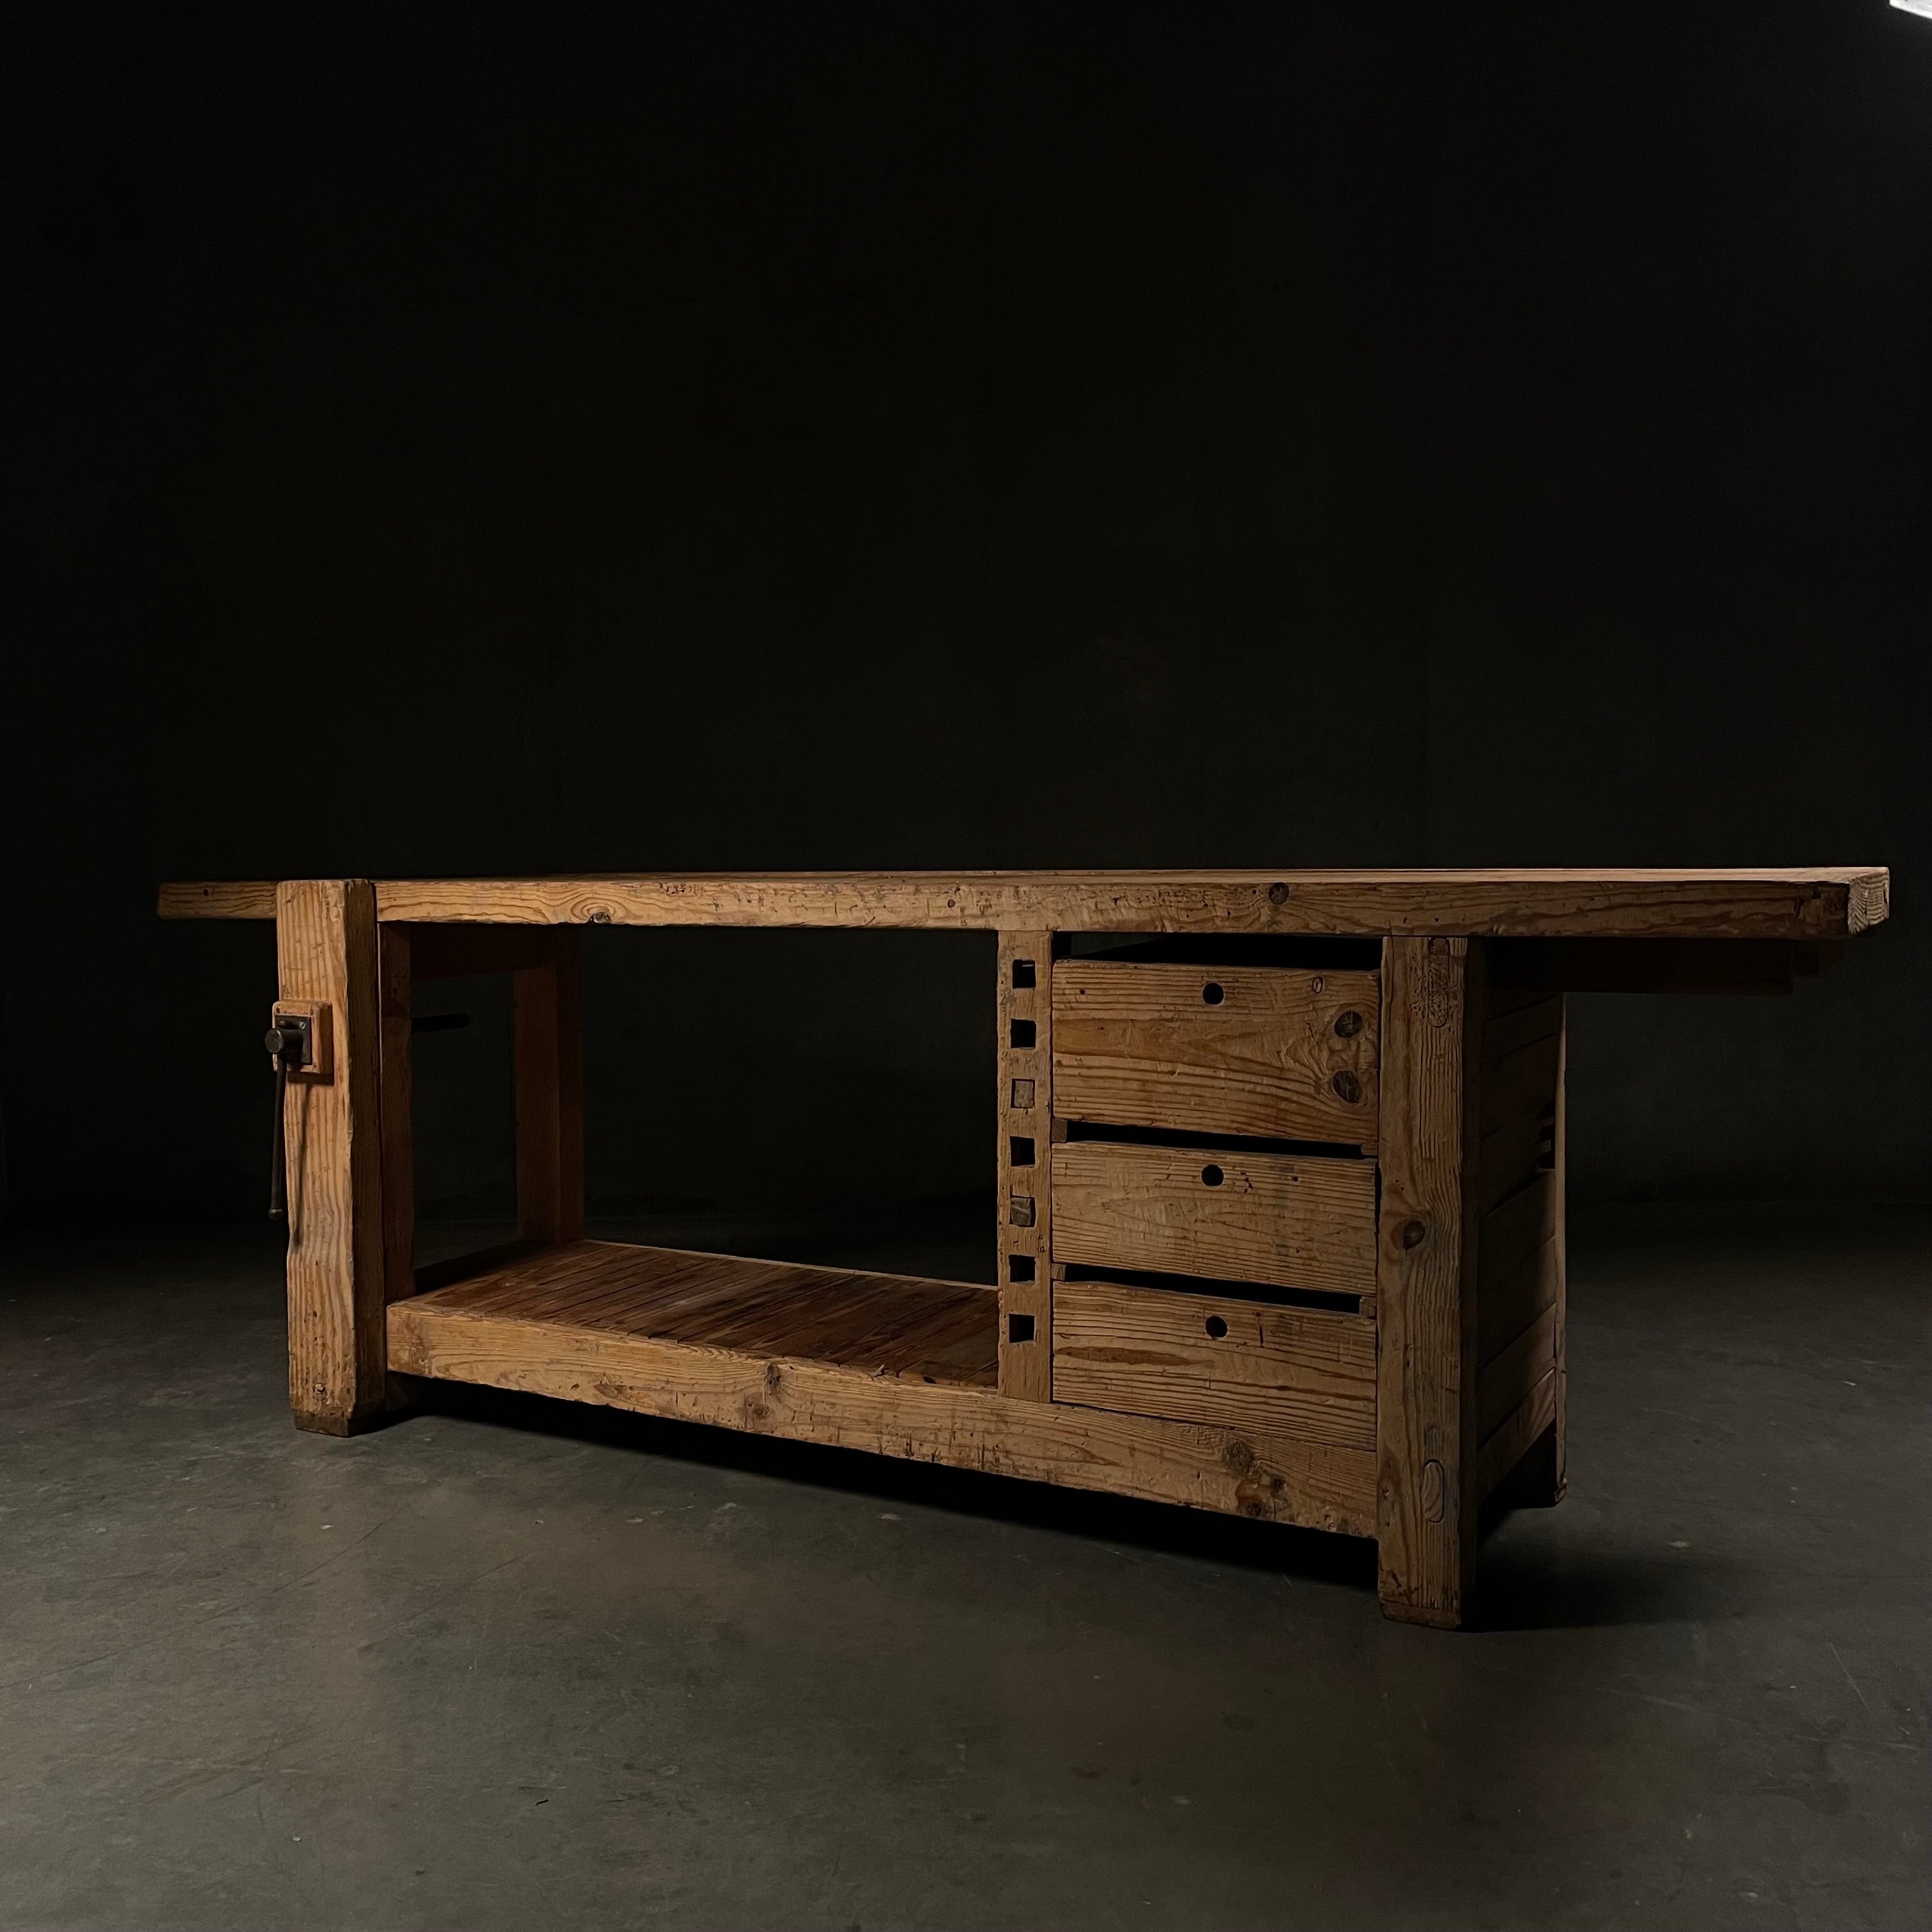 1880 Industrial Carpenters Workbench Table